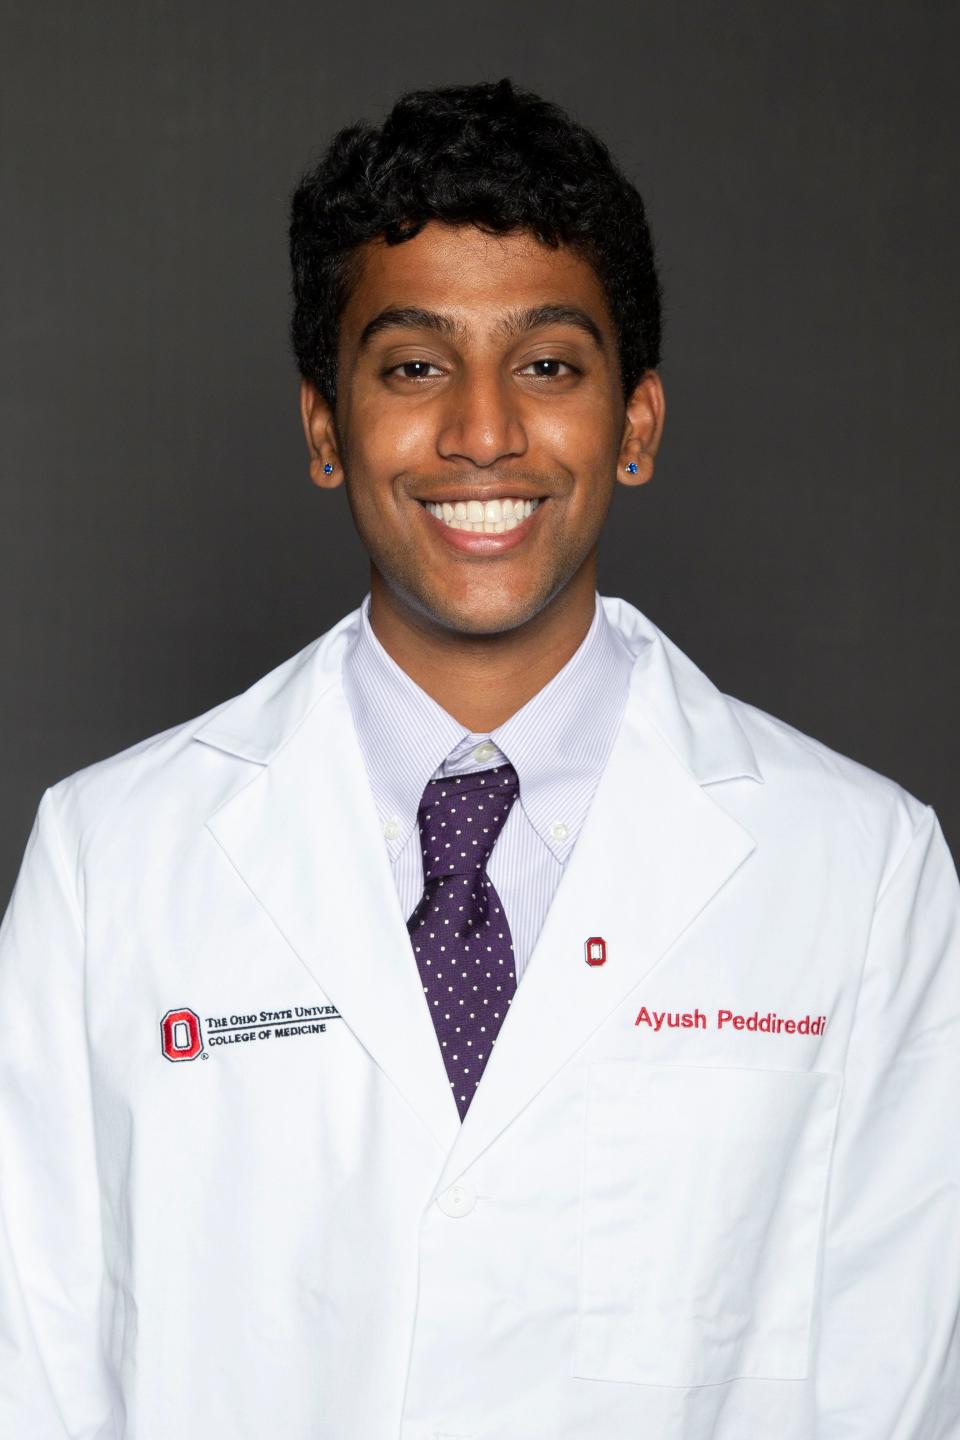 Ayush Peddireddi  is an Ohio State University medical student. The Centerville native has worked in biomedical research, medical journalism and regulatory medical writing.